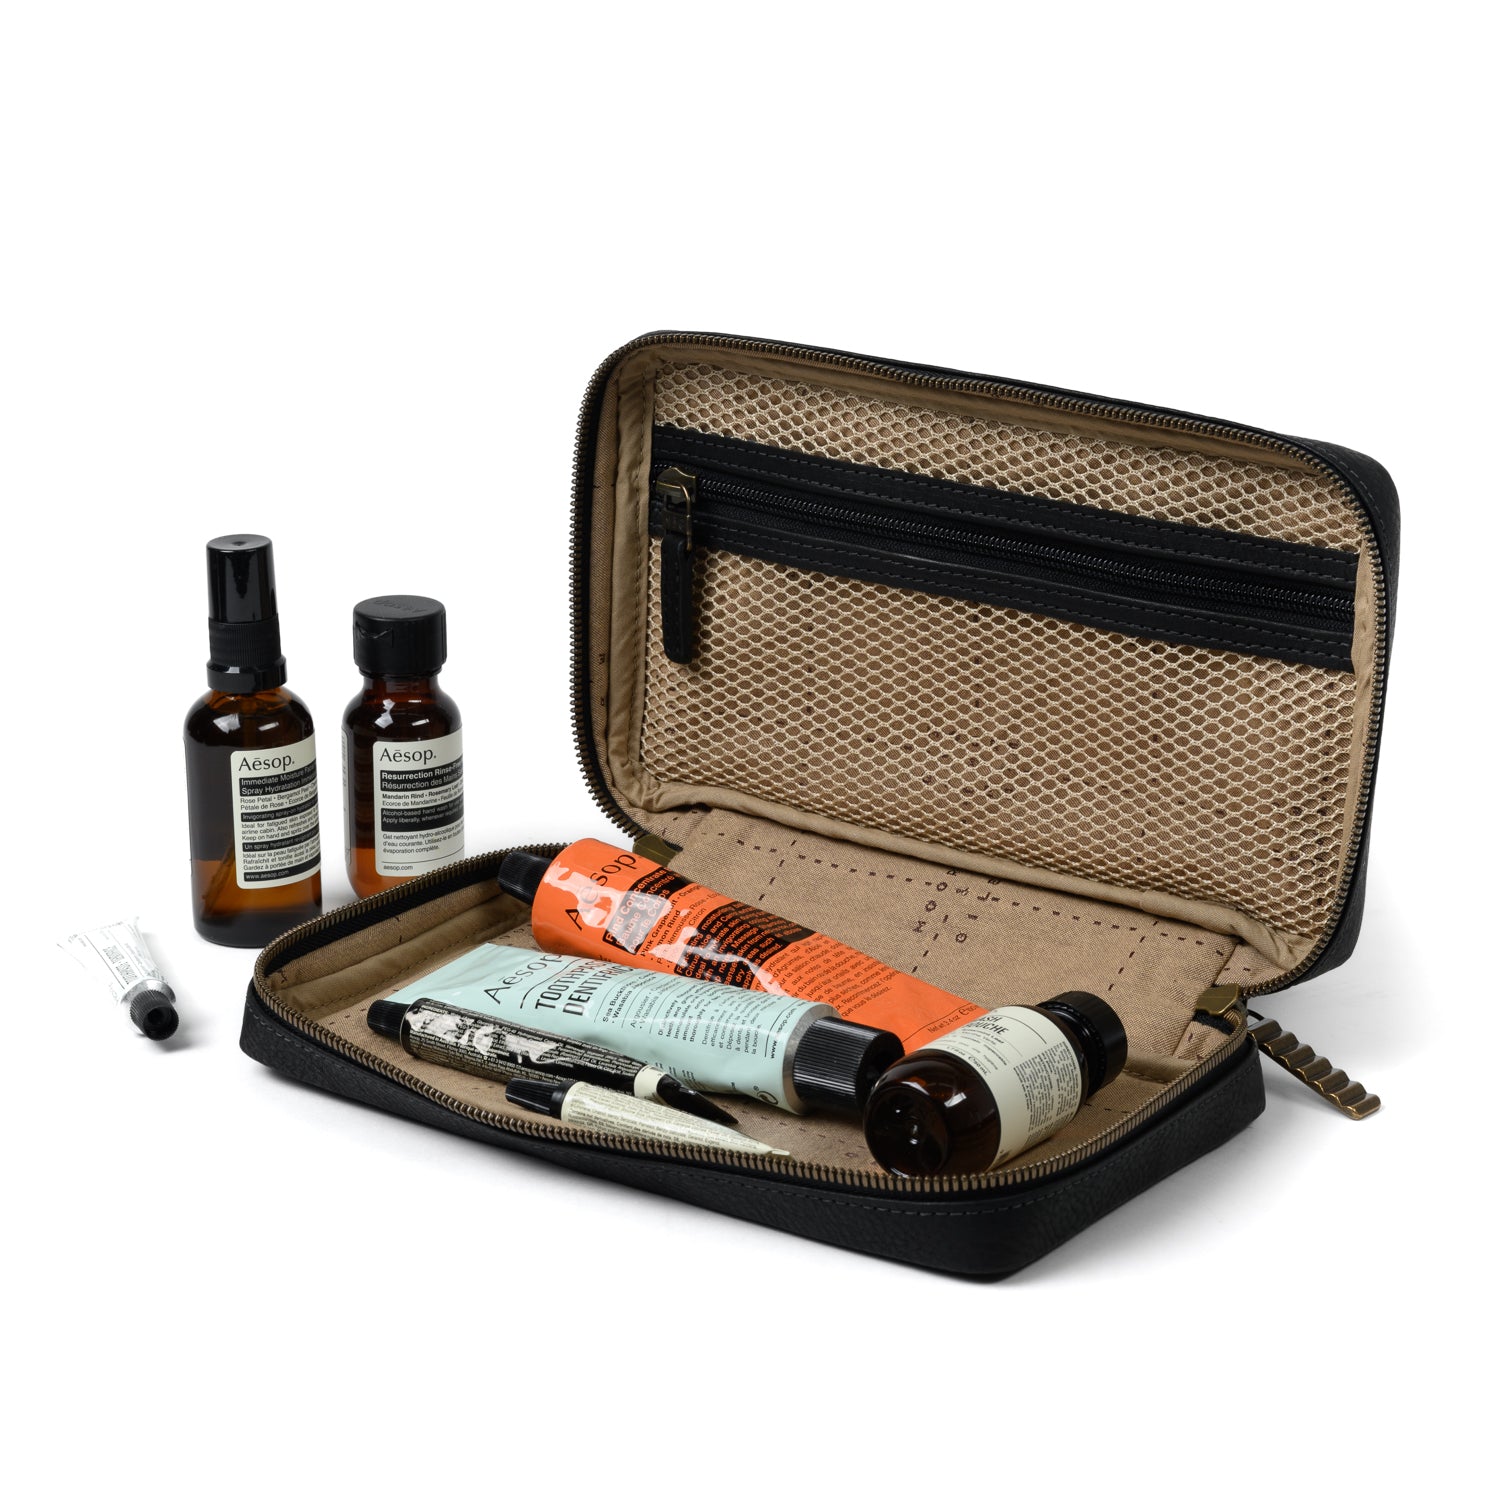 Kent Travel Kit in Seven Hills Black by Moore & Giles